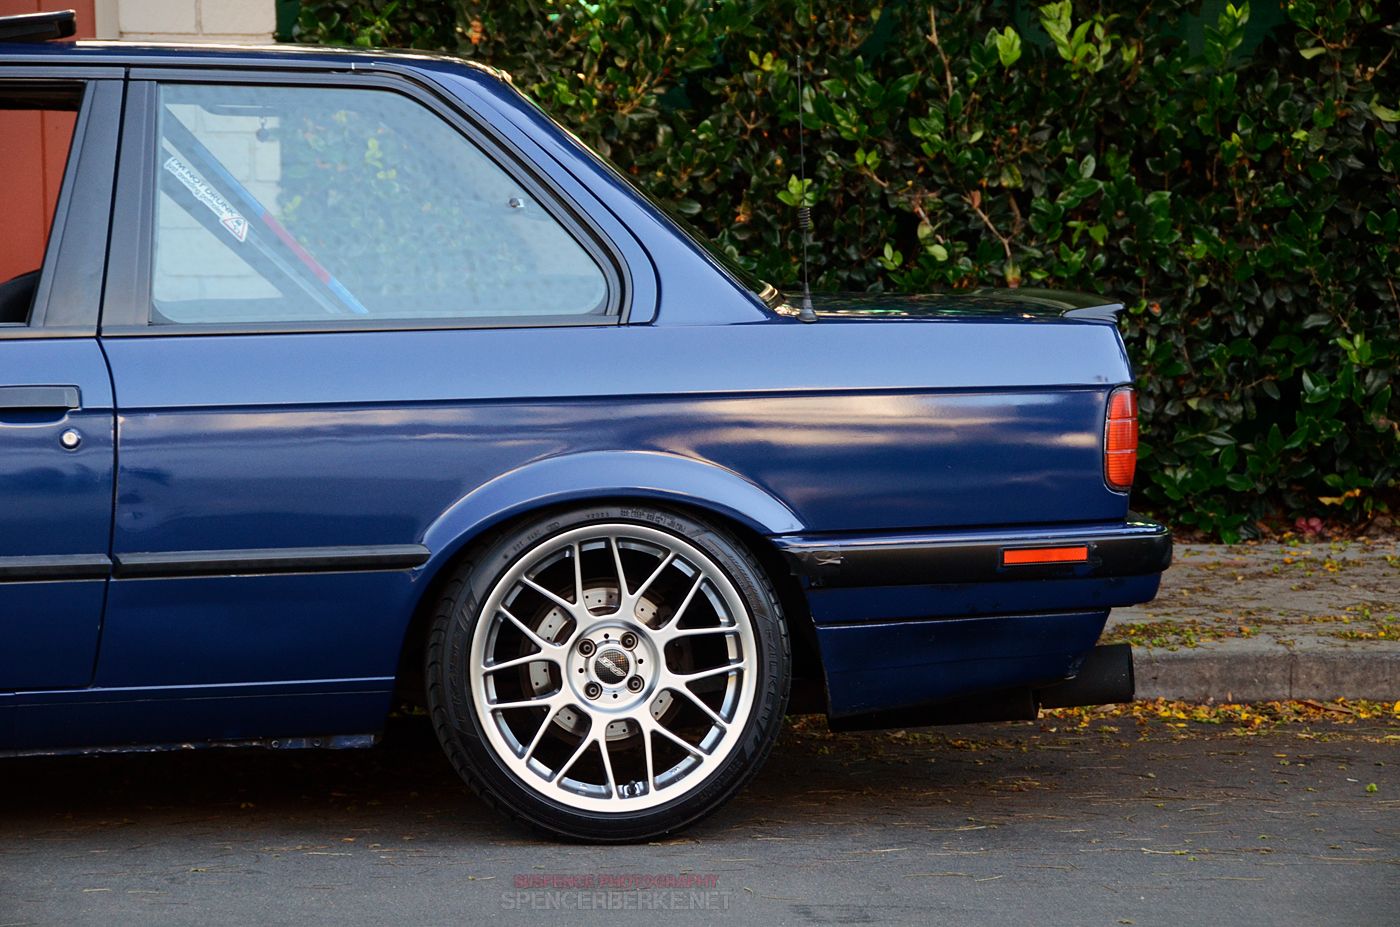 BMW E30 3 Series with 17